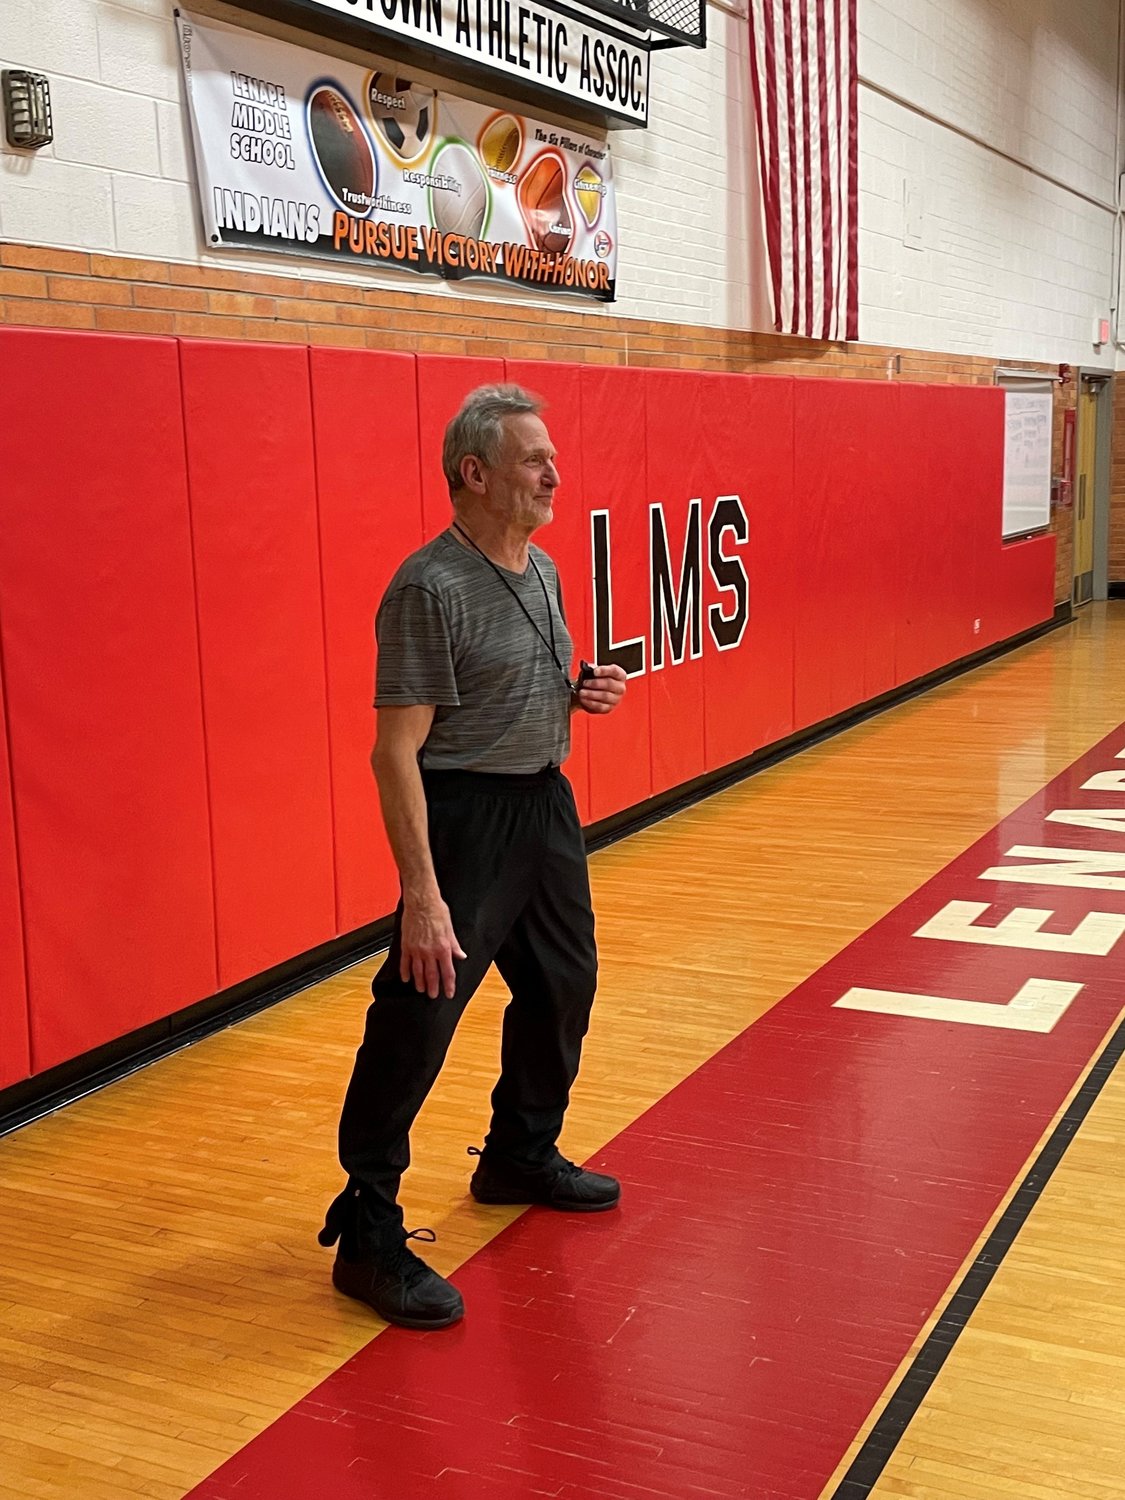 Art Bass has officiated as many as 20-25 games a week during busy stretches of the basketball season.